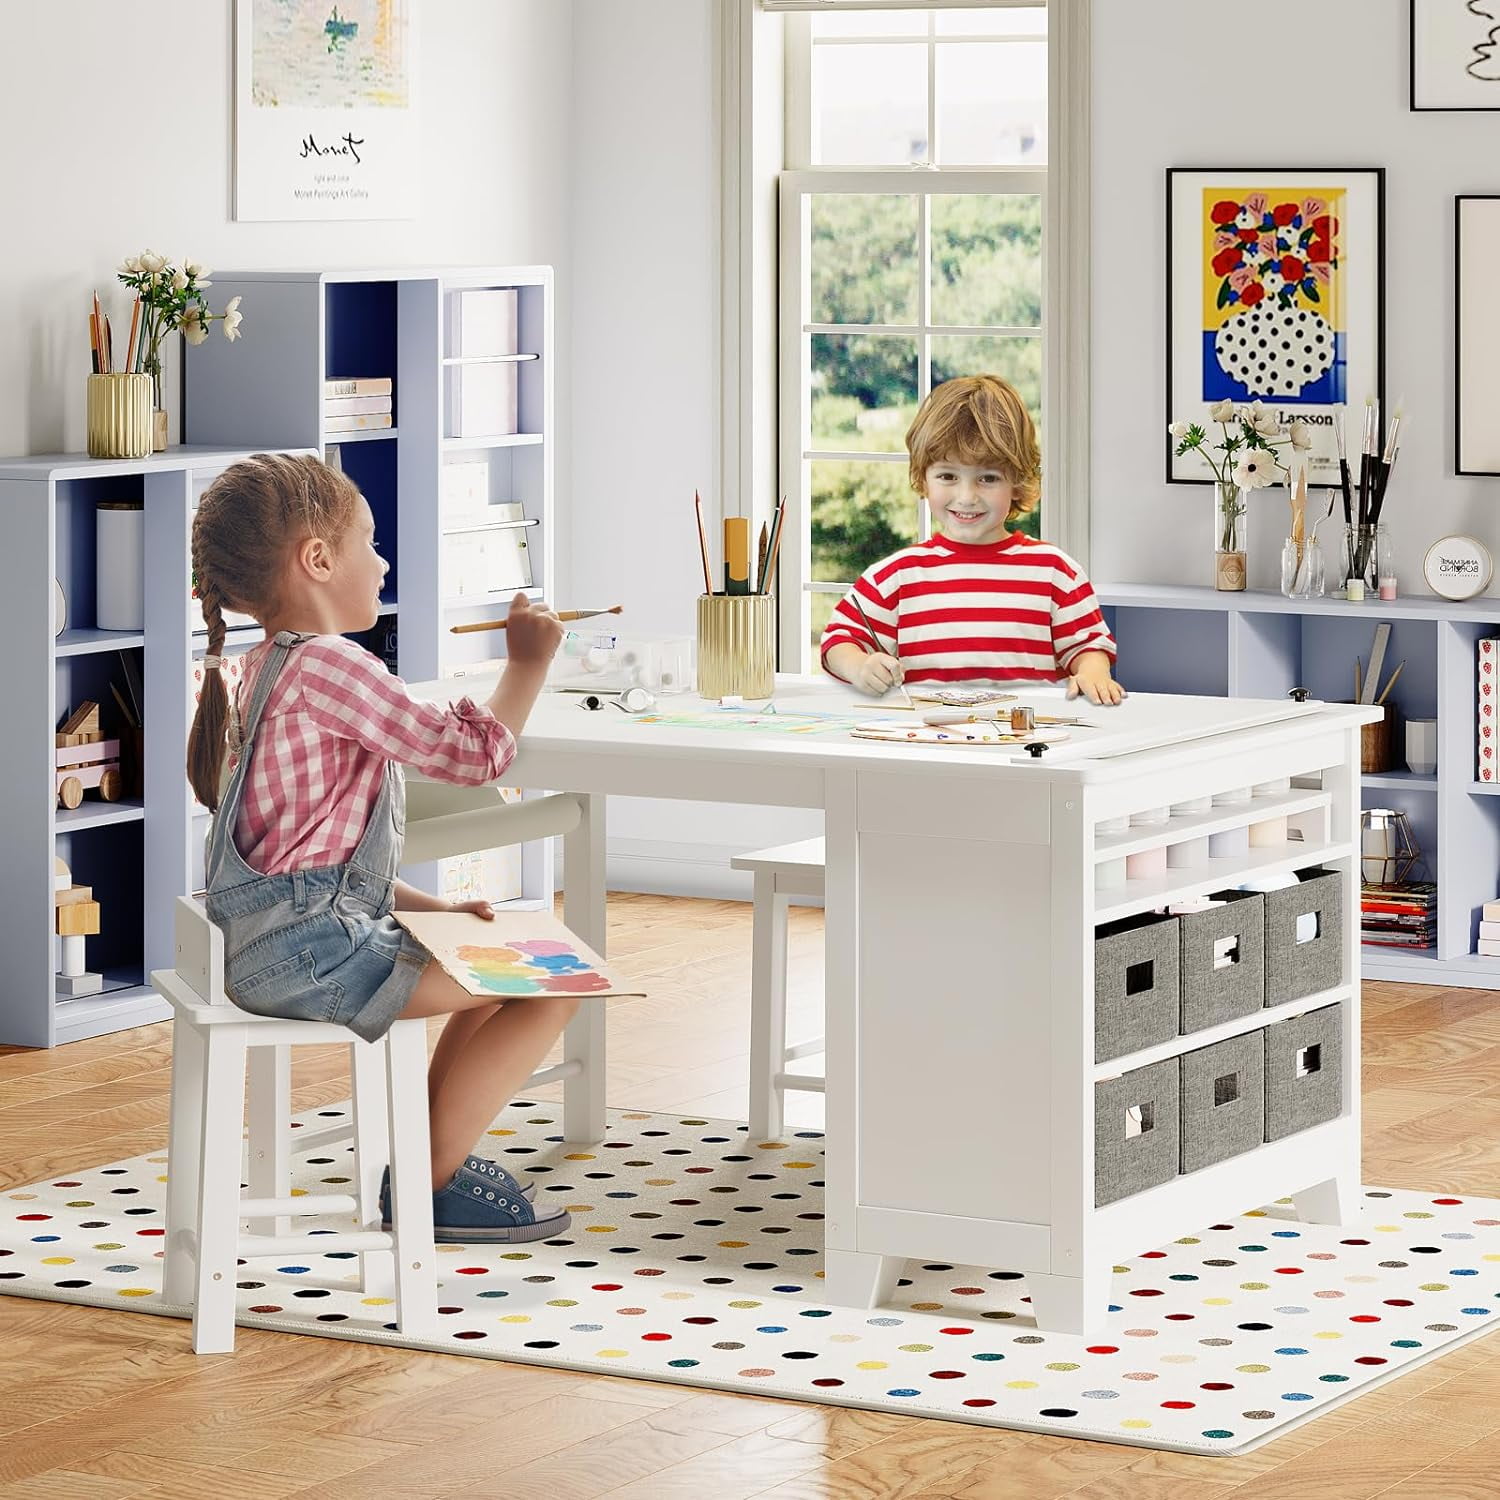 Wooden Drawing Desk Kids Art Table & Chairs Set w/ Paper Roll